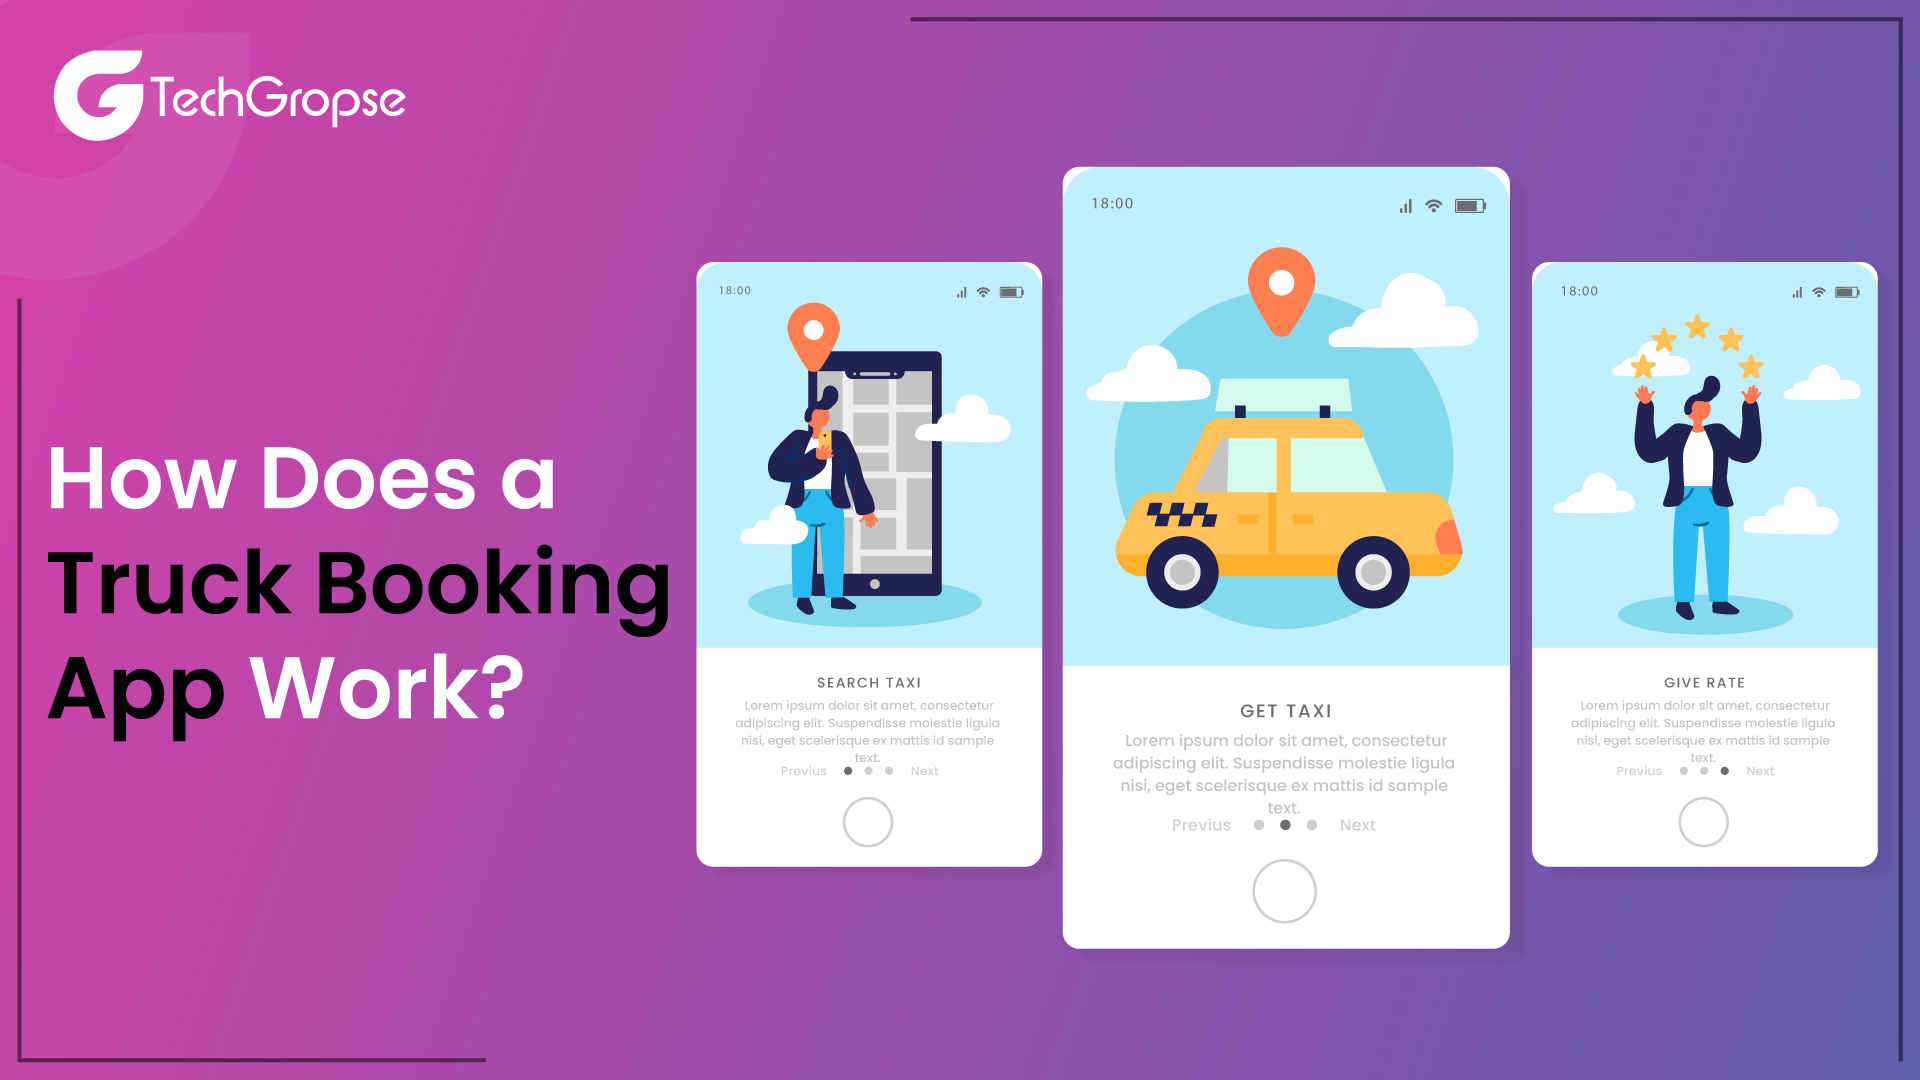 How Does a Truck Booking App Work?